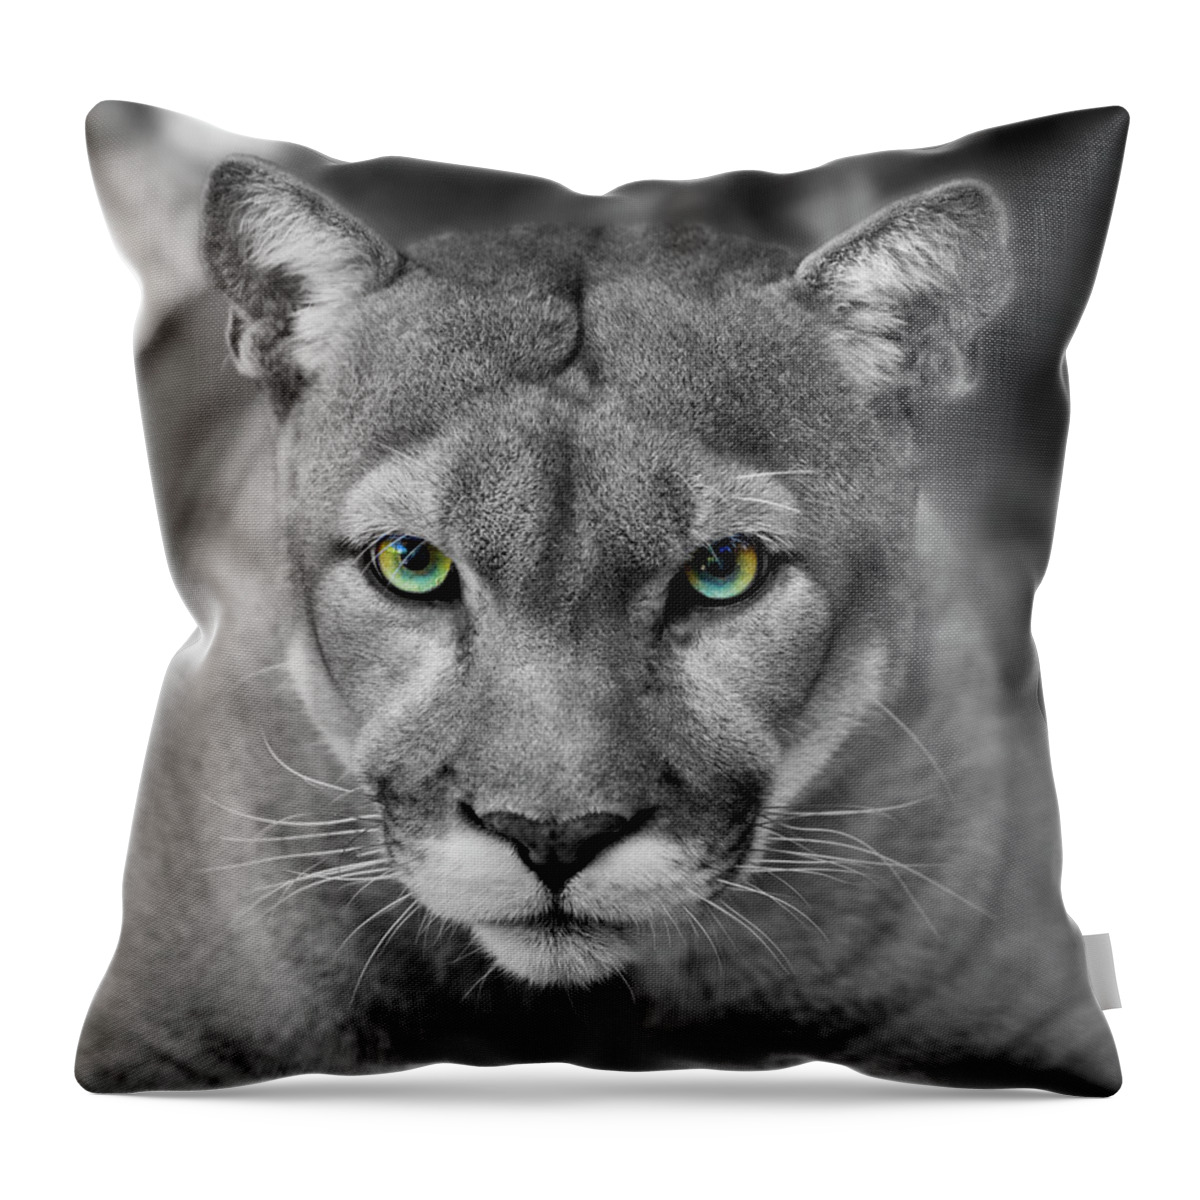 Animals In The Wild Throw Pillow featuring the photograph Florida Panther Black & White Eyes In by Denguy